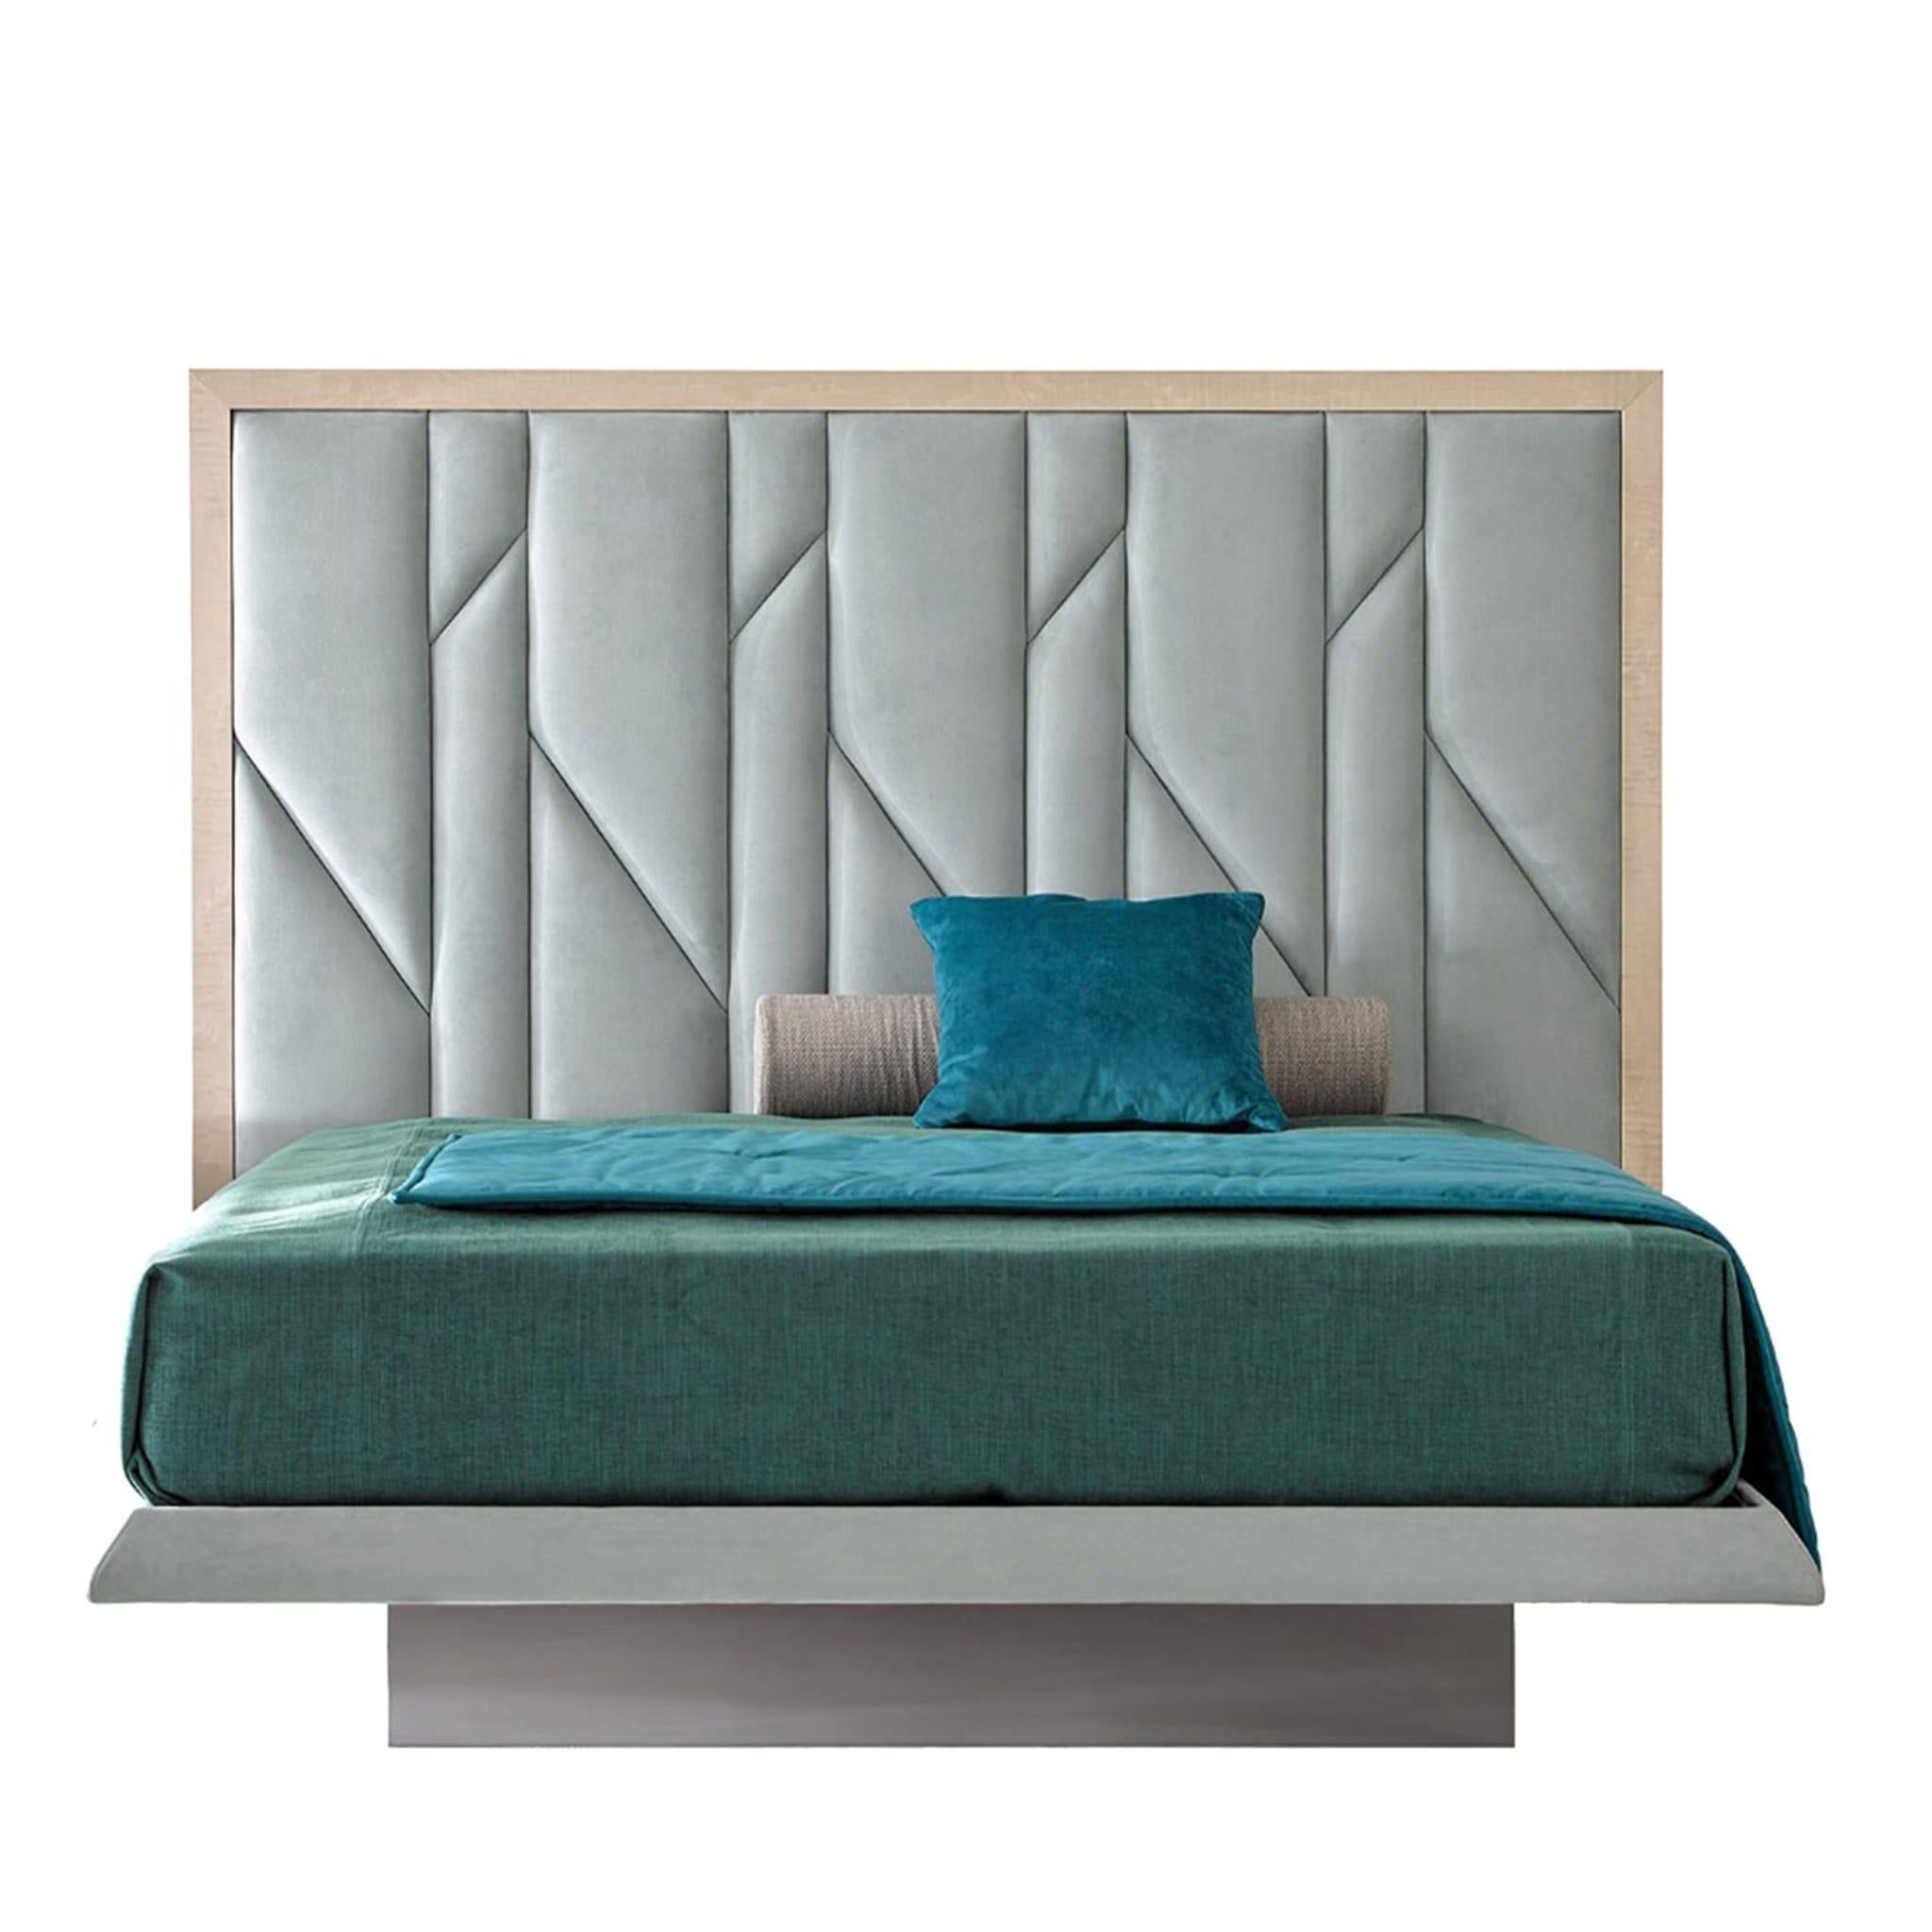 Bed composed of padded headboard with wooden finishes, padded bed frame, and foot in extra-clear glass. Covered in Econabuk Timo - water repellent and easy-to-clean fabric. Fox matt wood finish. Structure only. Bed base, mattress, bed set, and